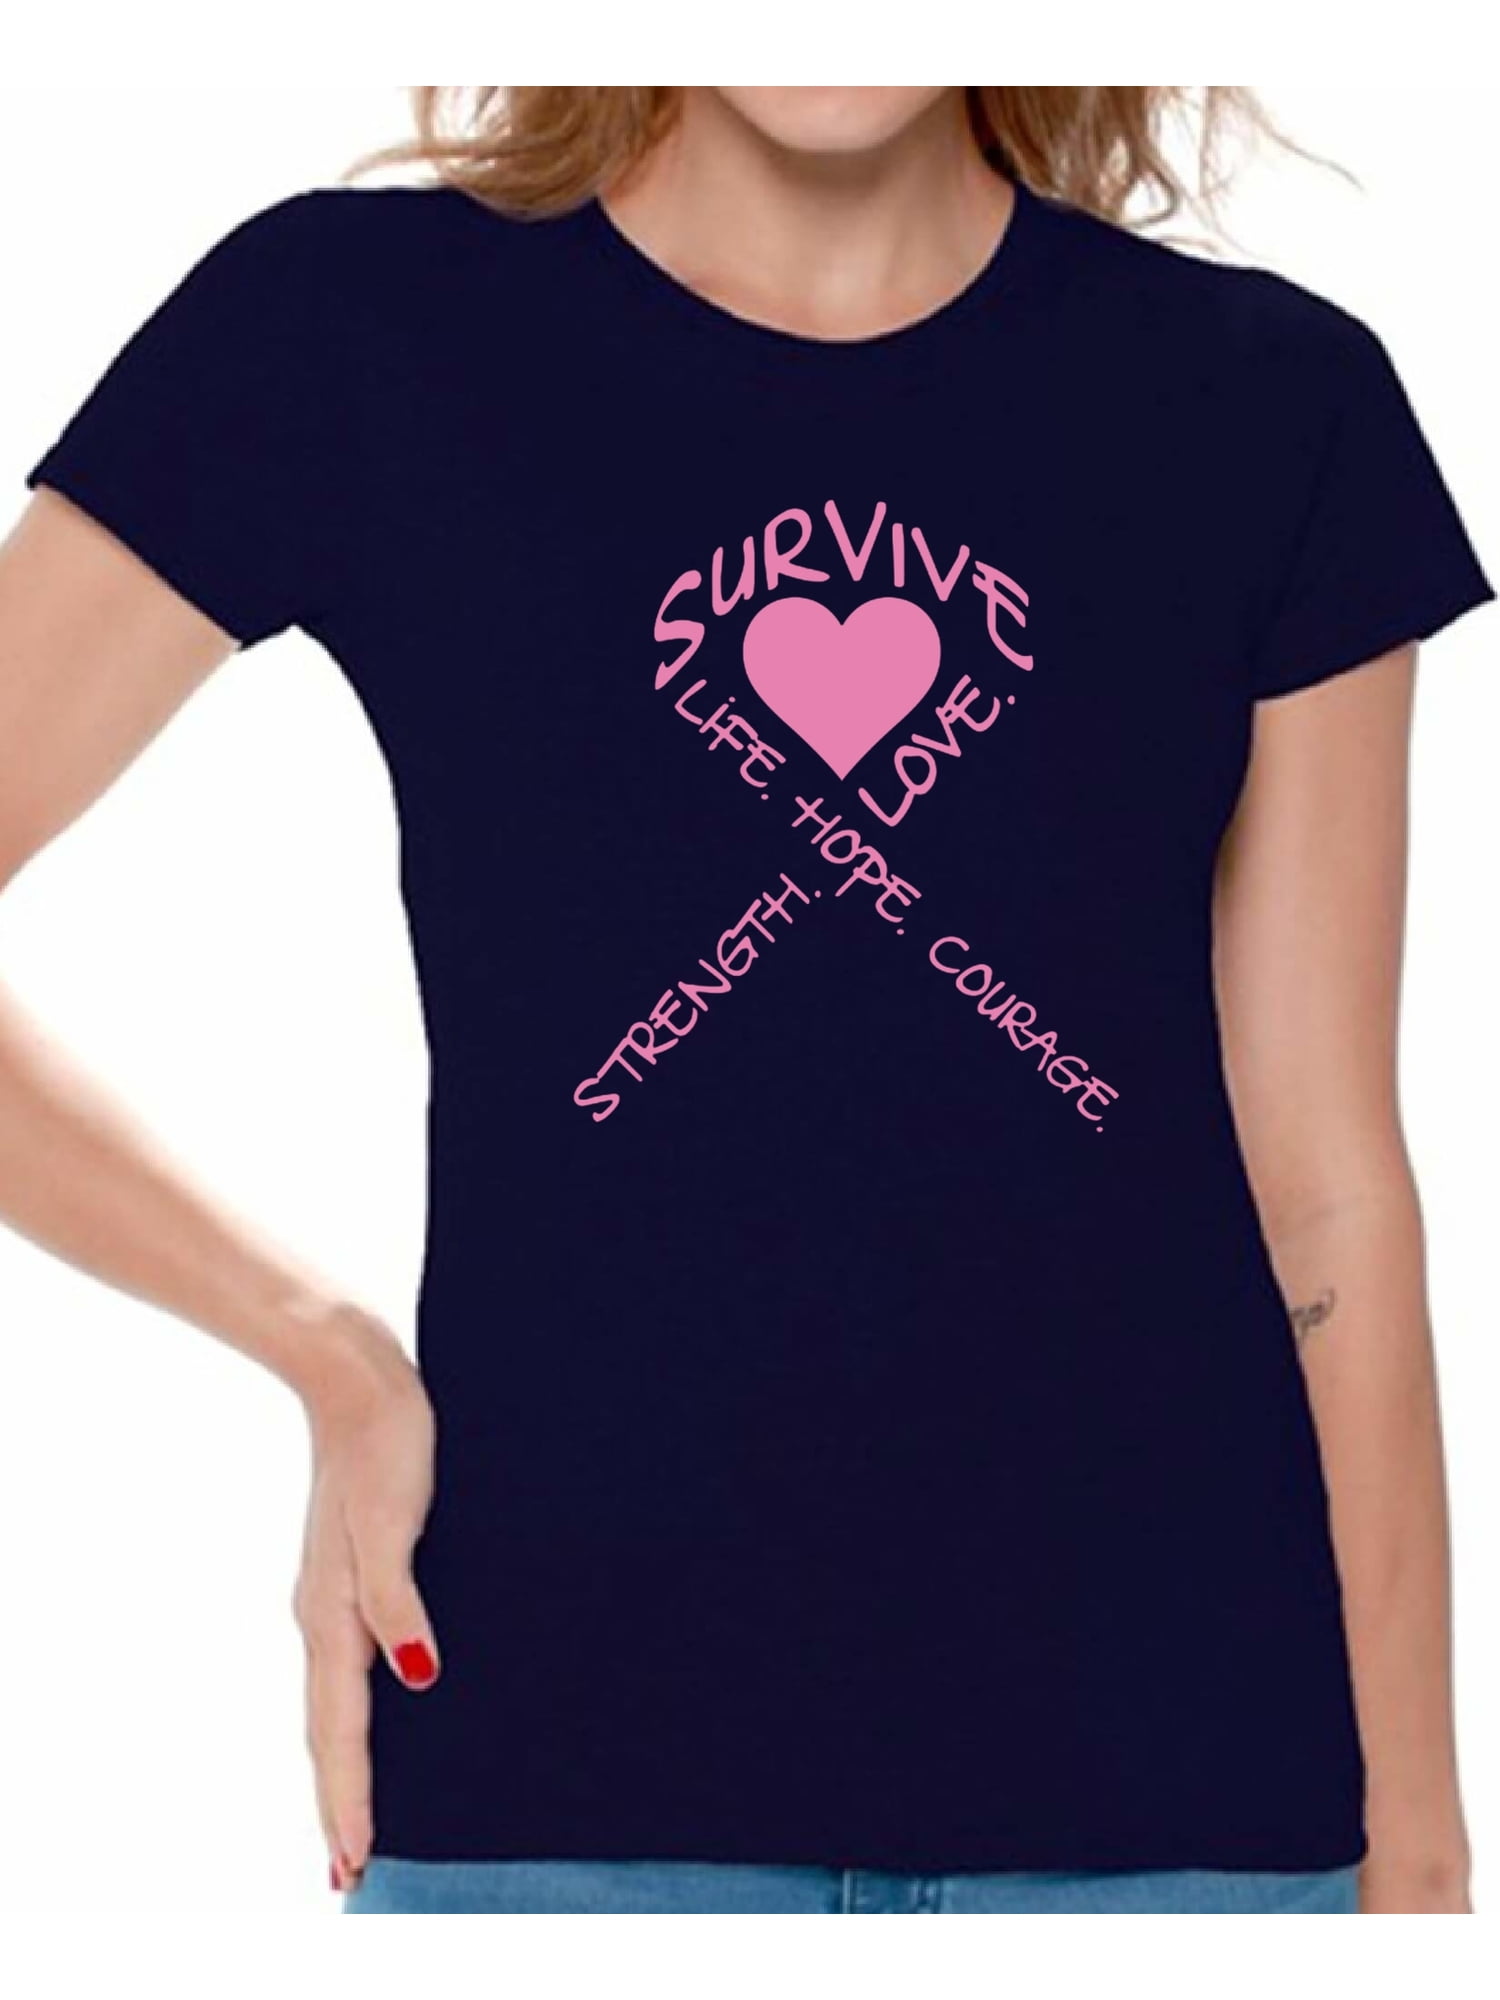 Courage Hope Strength Breast Cancer Support Graphic T Shirts for Women T-Shirts